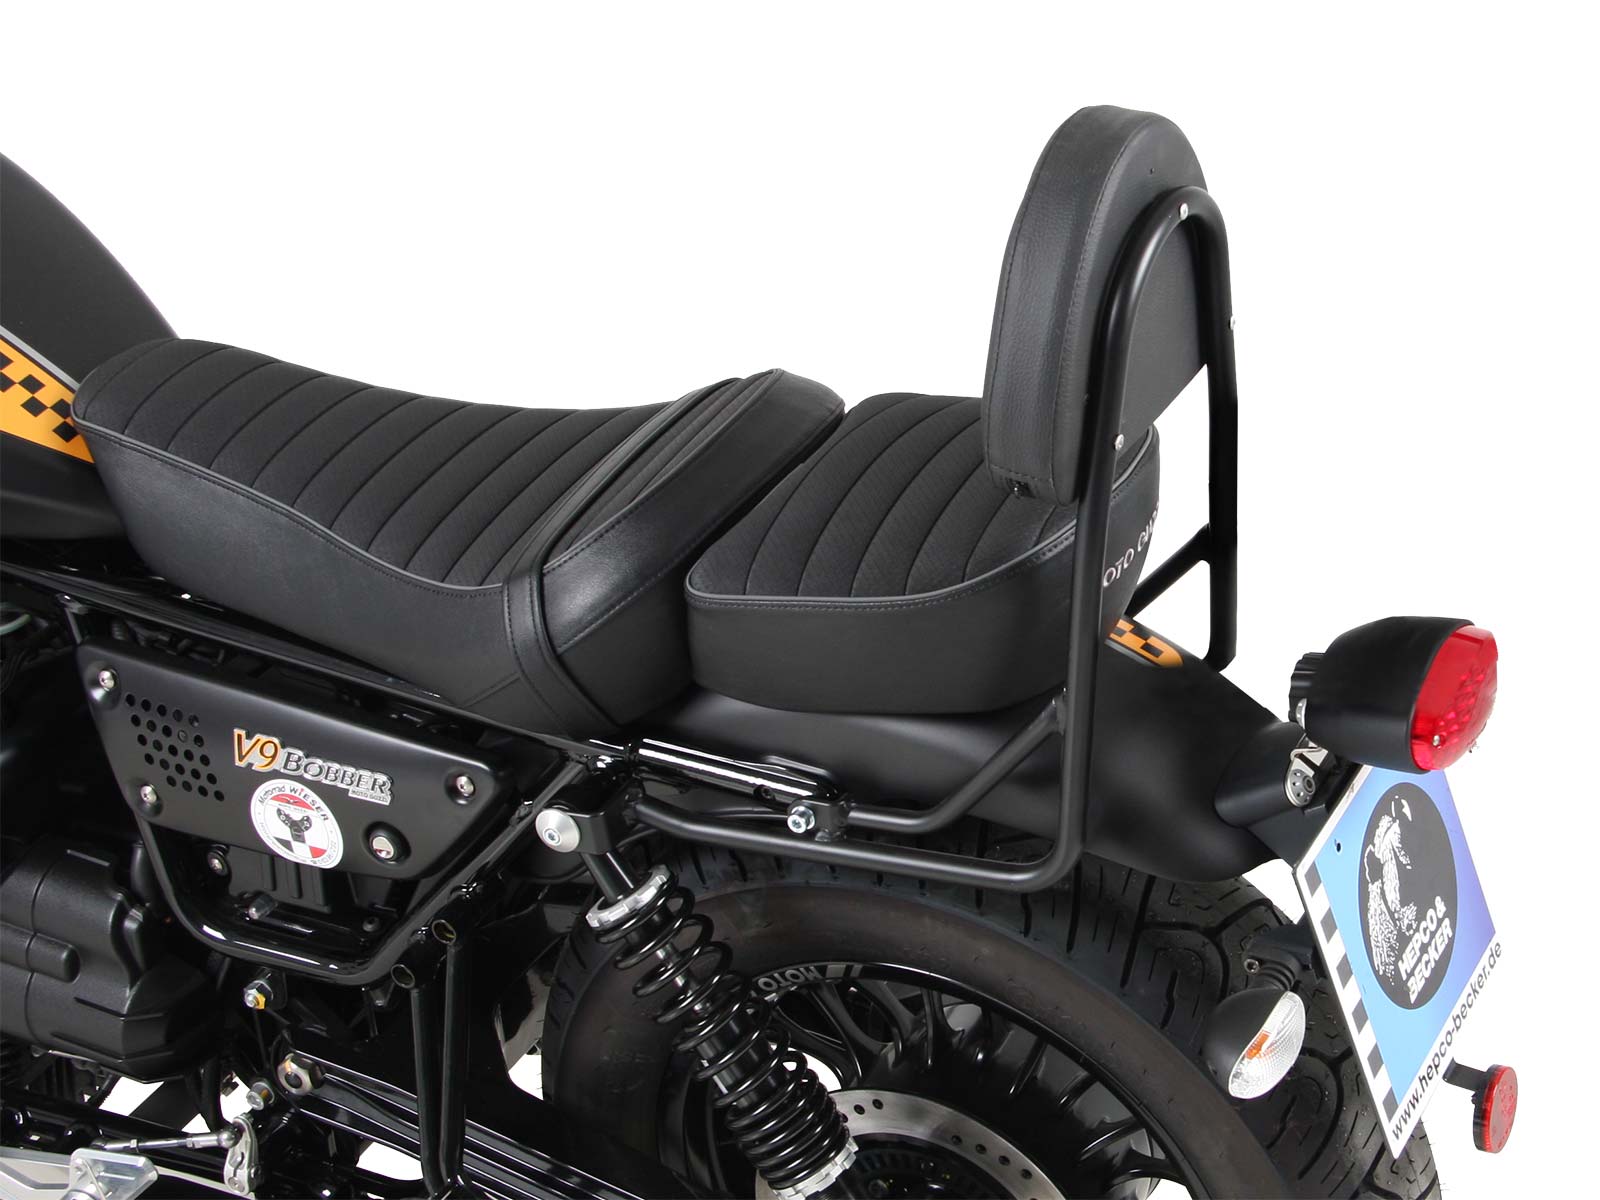 Sissybar without rearrack for long seat - black for Moto Guzzi V9 Bobber/Special Edition (2021-) with long seat